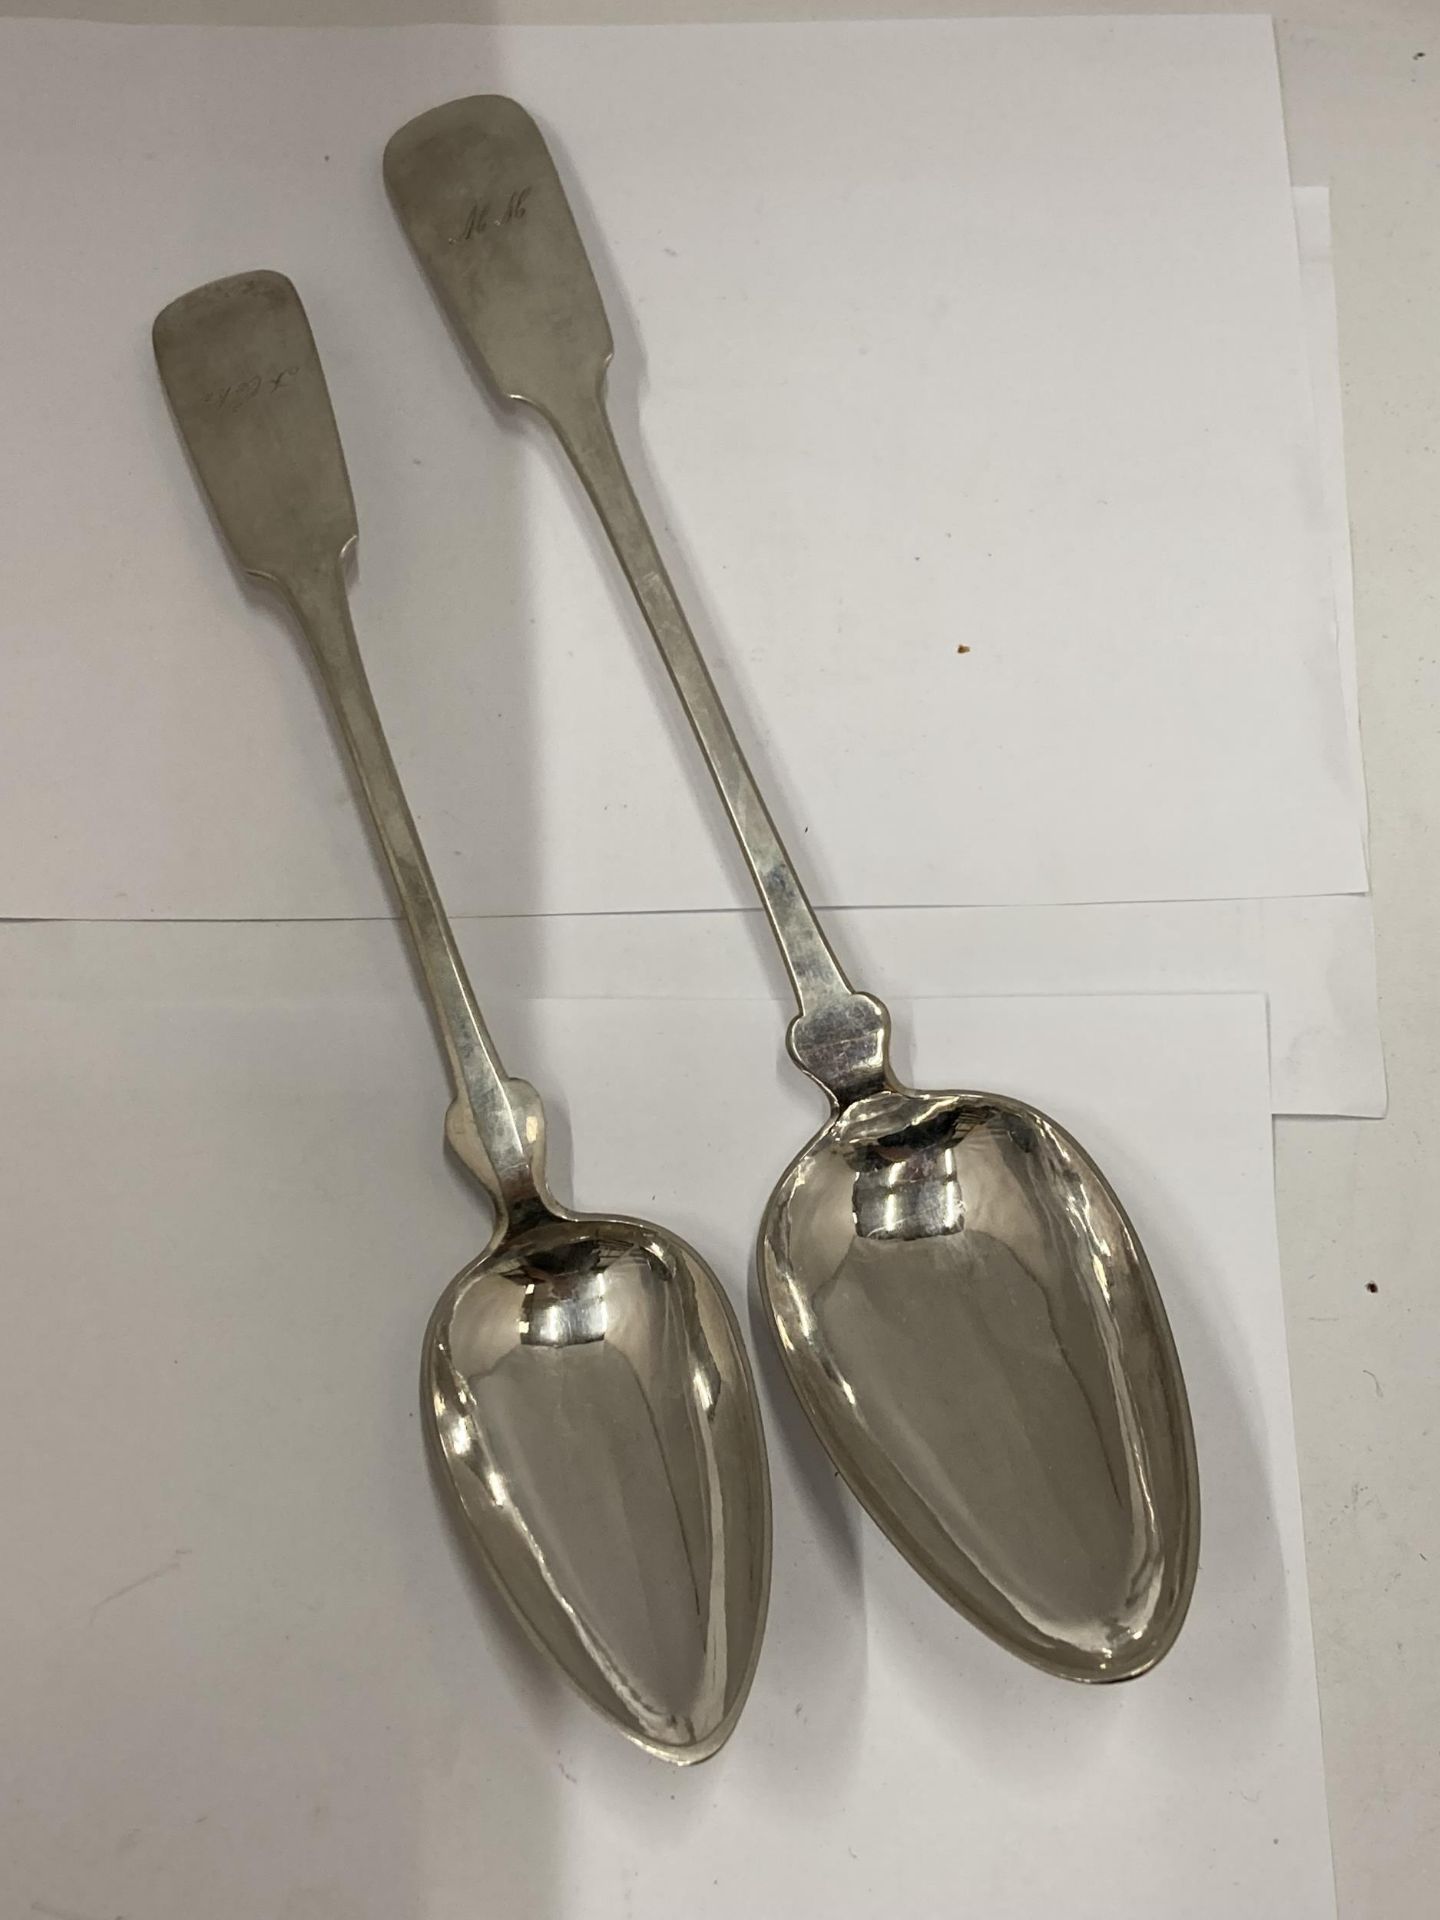 TWO CONTINENTAL SILVER BASTING SPOONS ONE ENGRAVED 1865 GROSS WEIGHT 288.2 GRAMS